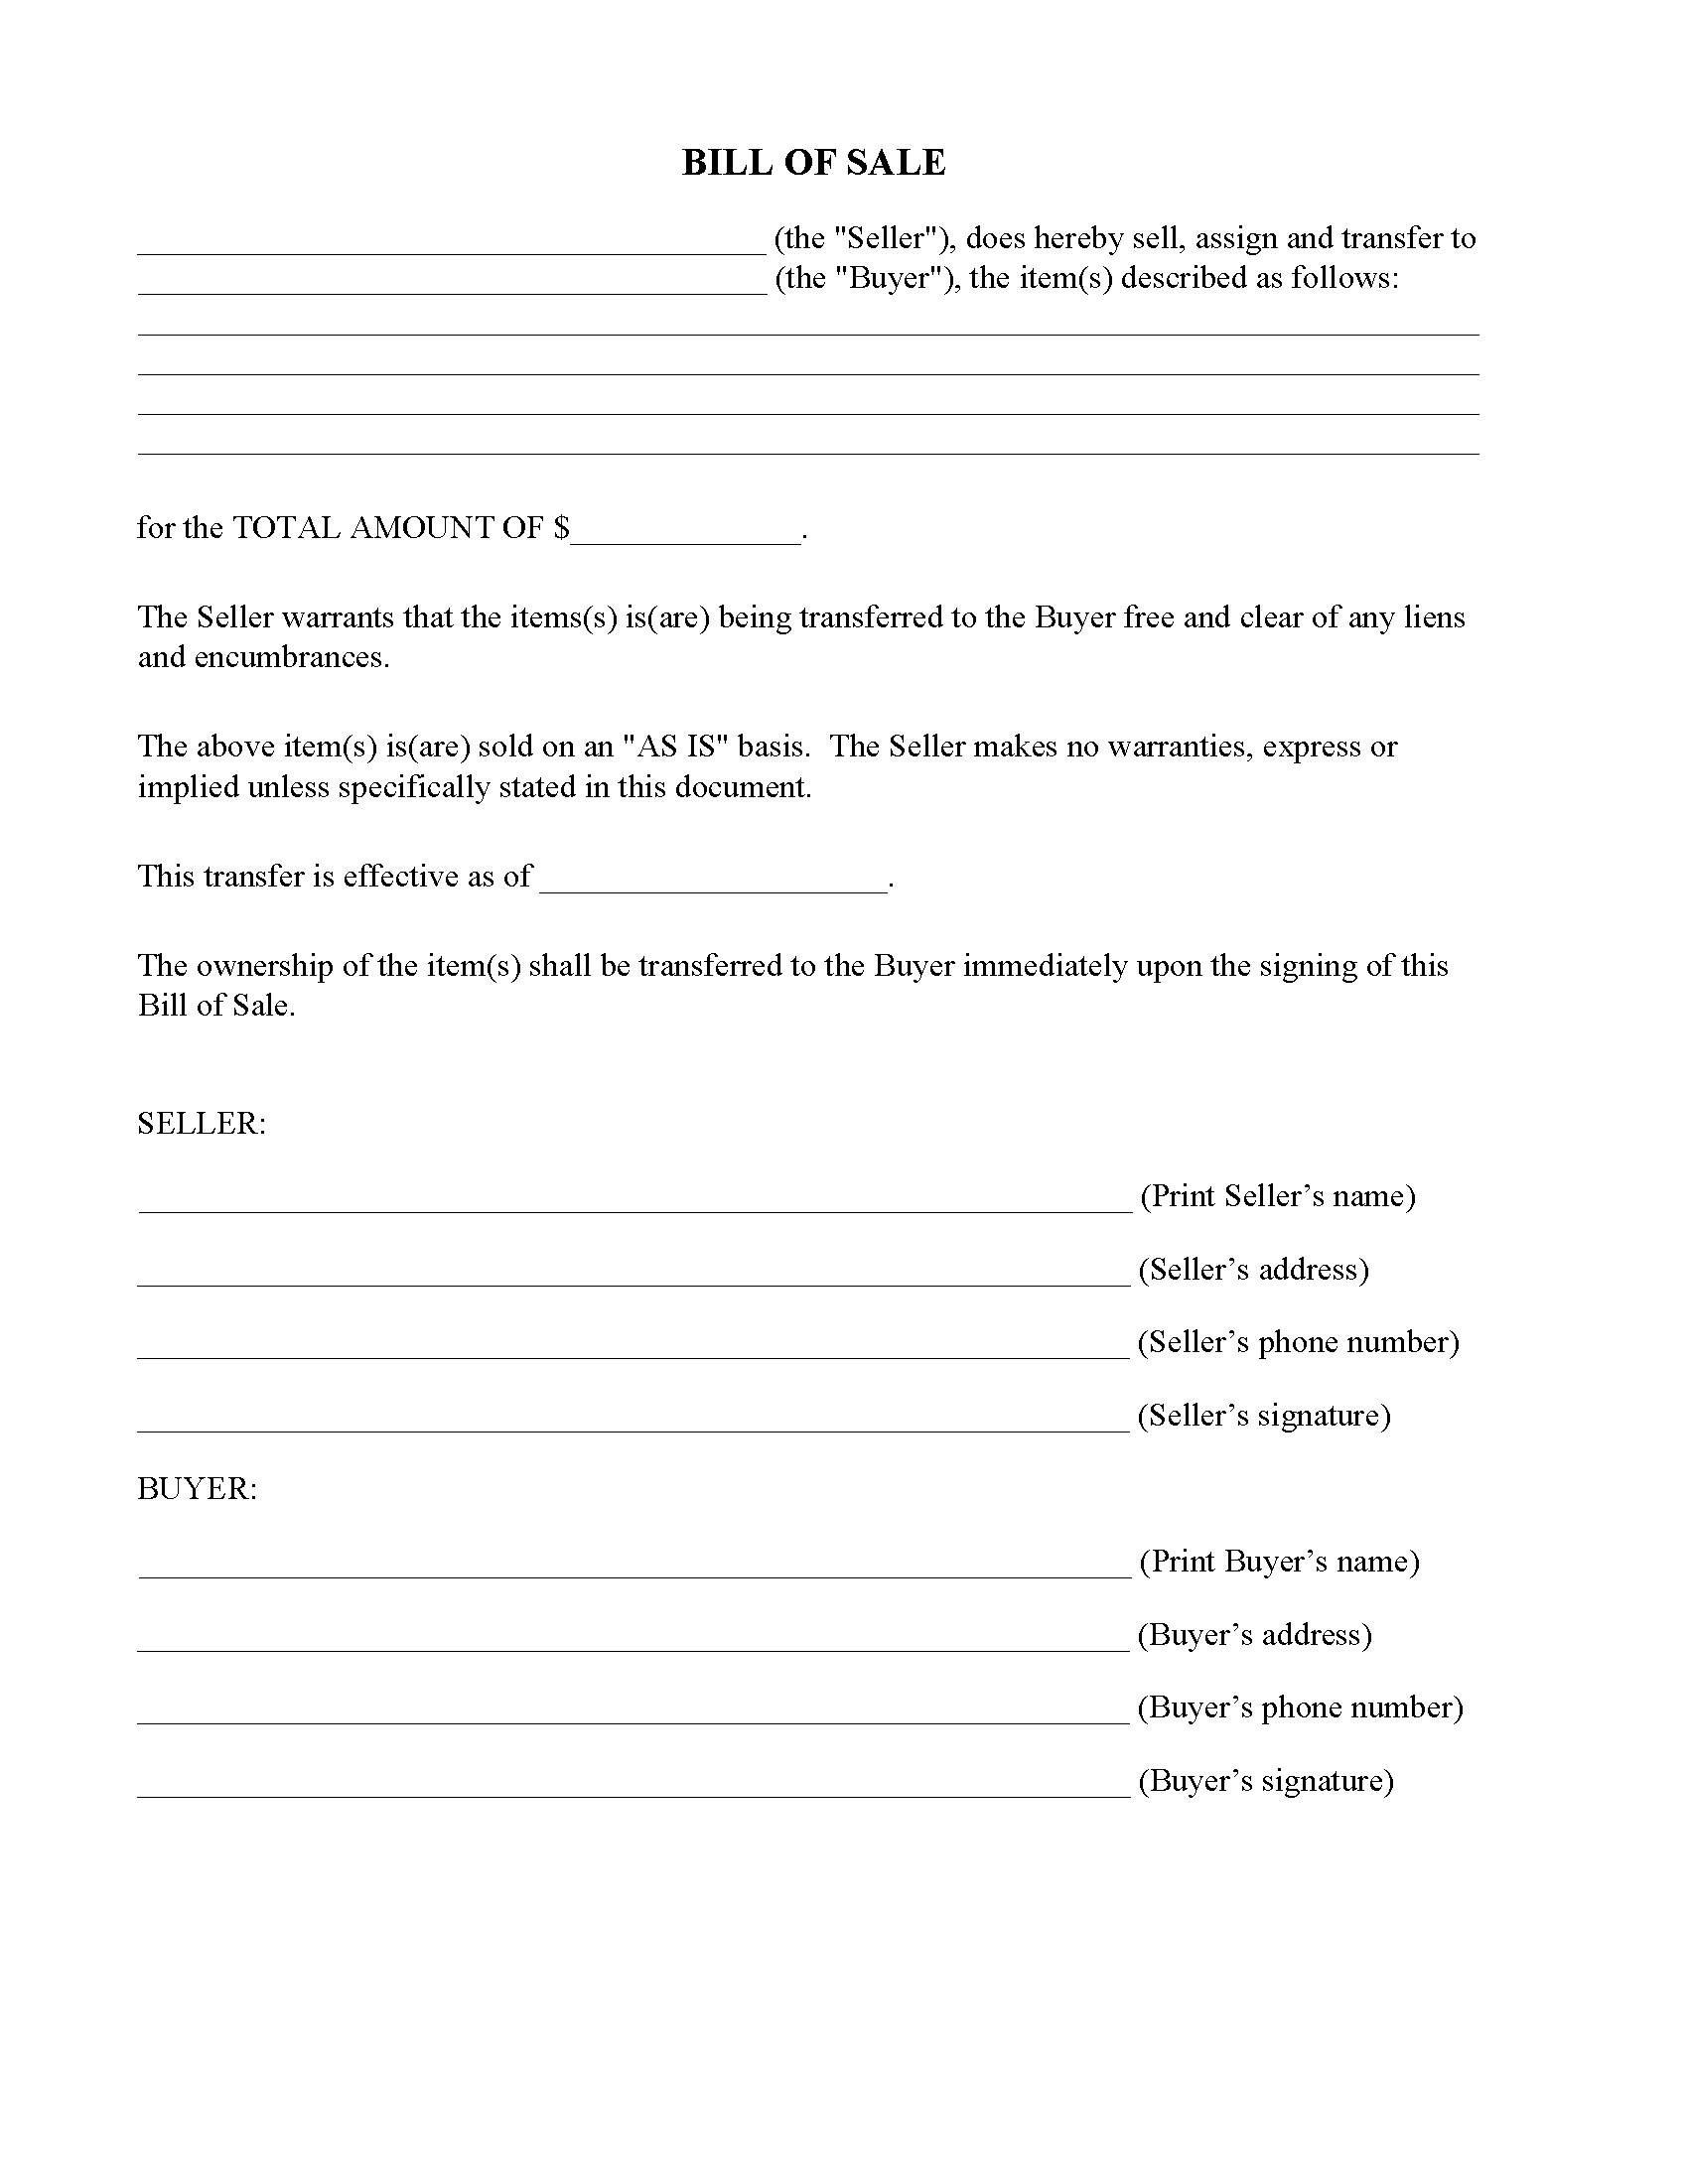 Alabama Simple Bill of Sale Form - Free Printable Legal Forms